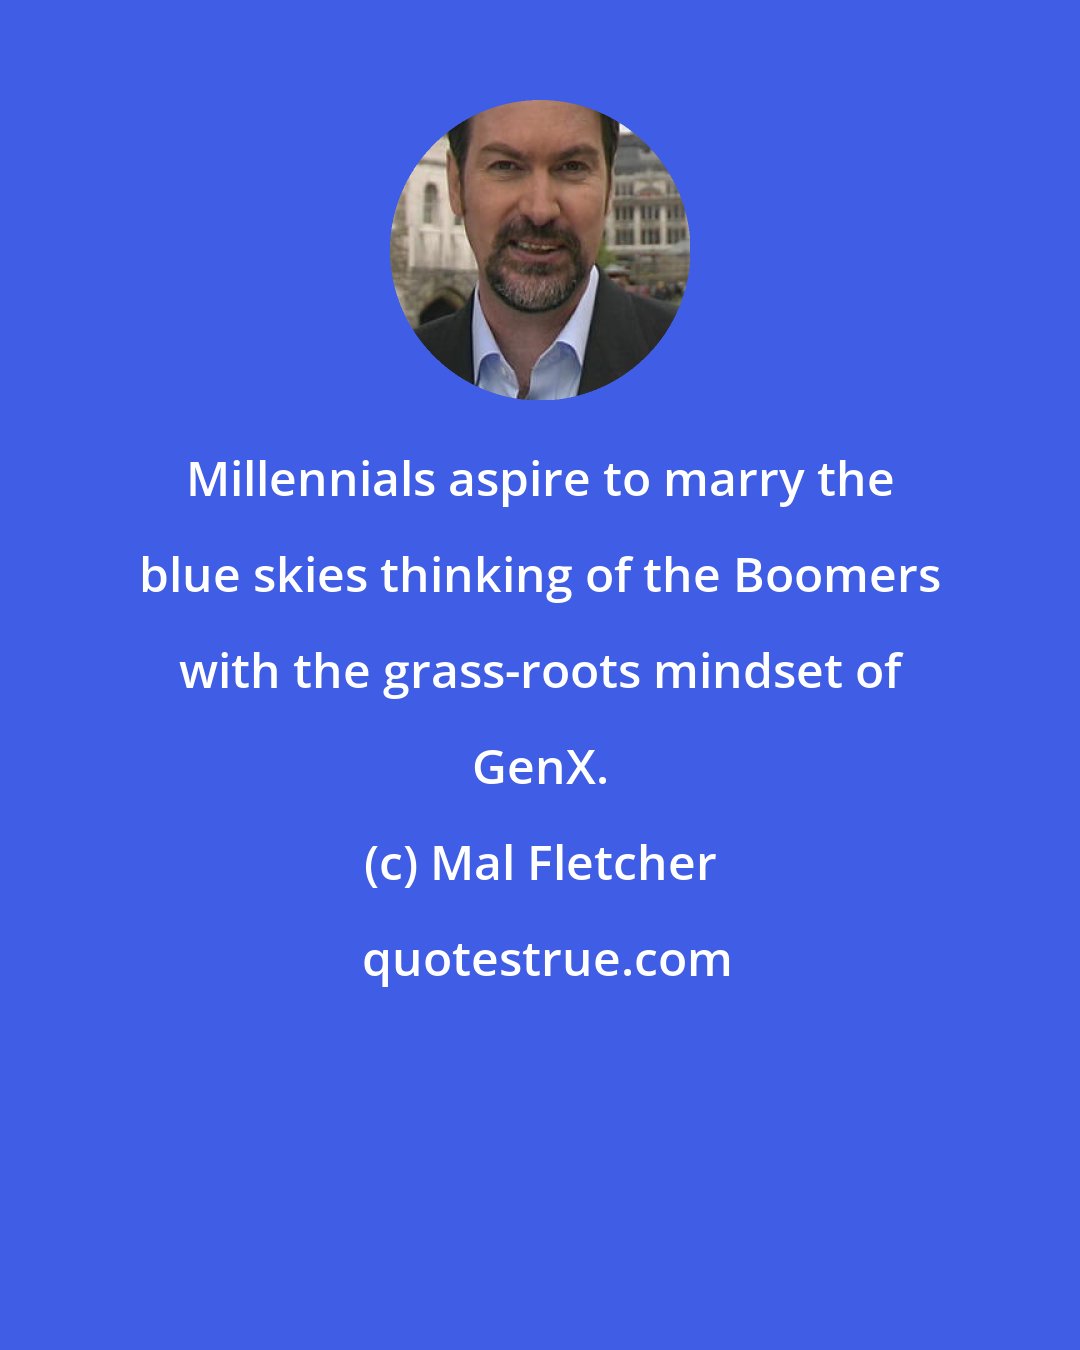 Mal Fletcher: Millennials aspire to marry the blue skies thinking of the Boomers with the grass-roots mindset of GenX.